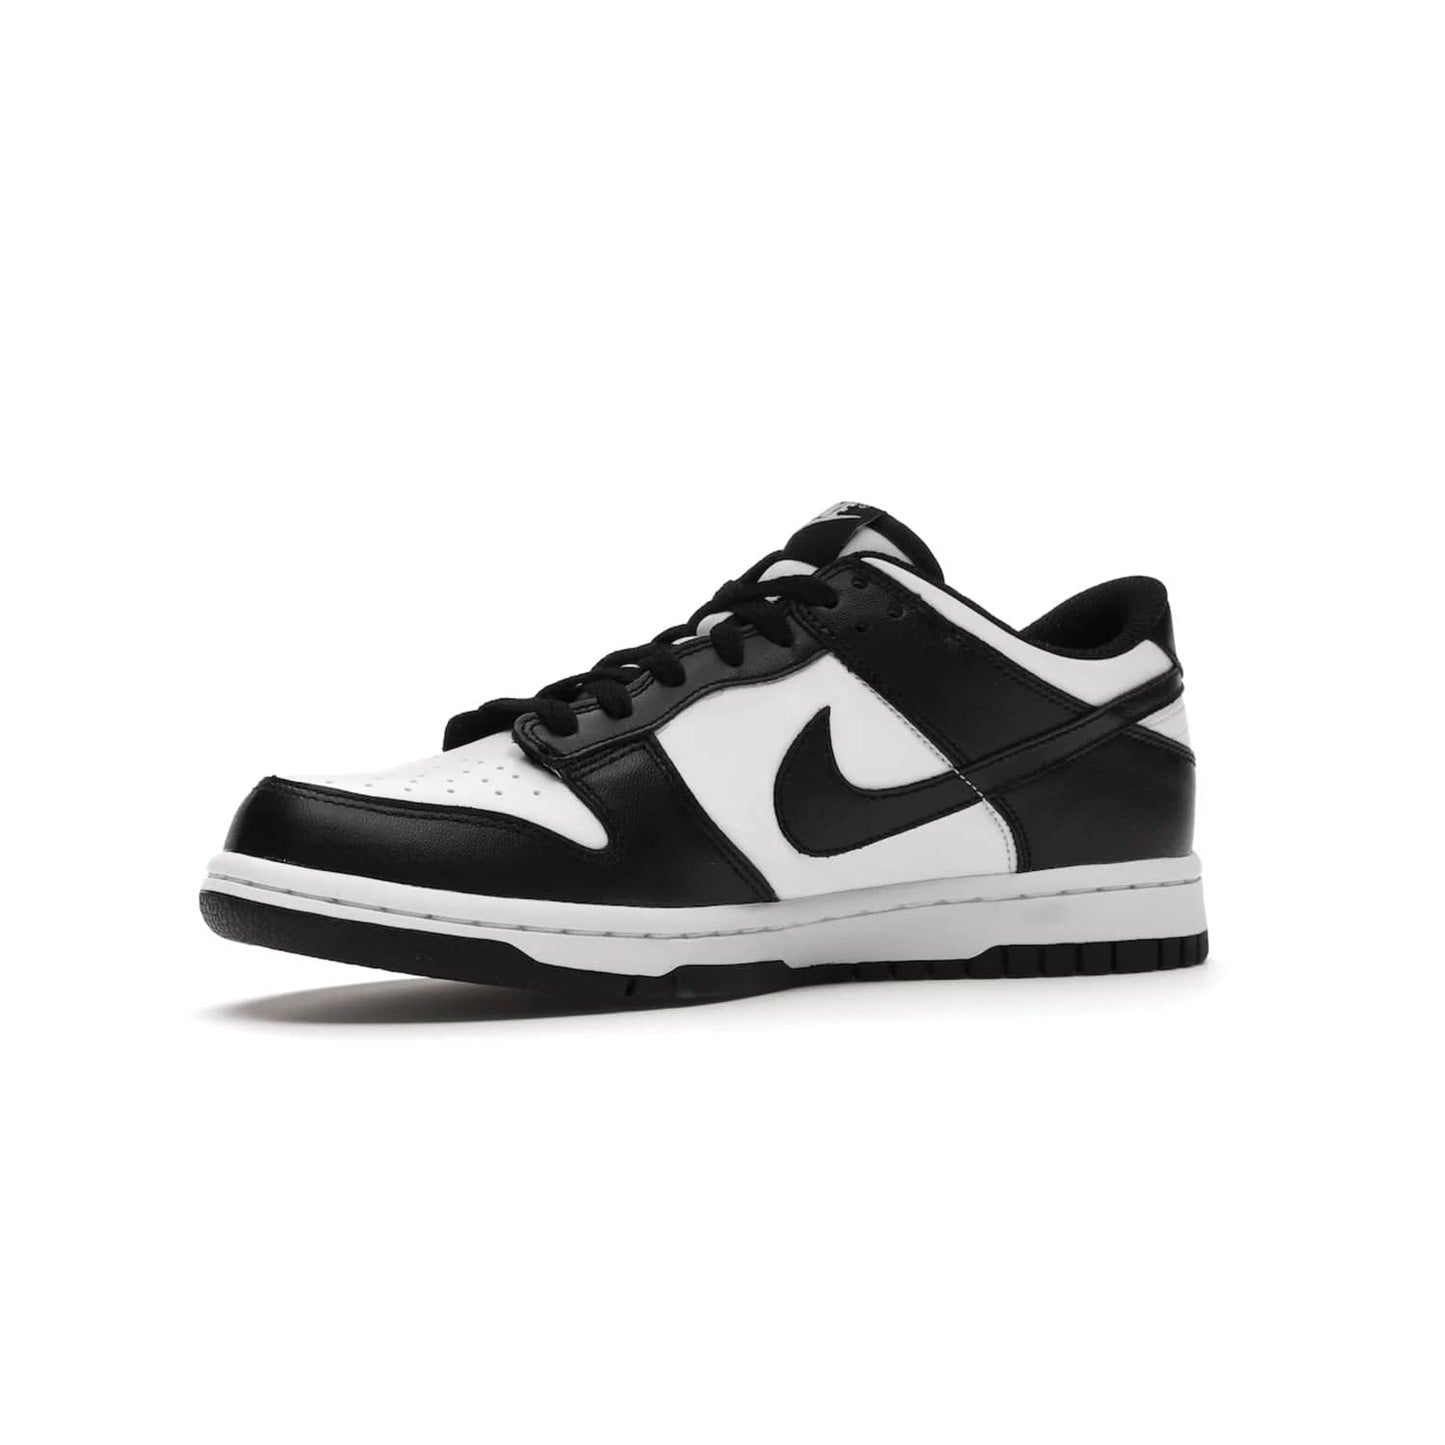 Nike Dunk Low Retro White Black Panda (2021) (GS) - Image 16 - Only at www.BallersClubKickz.com - Upgrade your style with the Nike Dunk Low Retro White Black (GS). Featuring premium leather, iconic Nike text, signature Swoosh logo and striking black/white colorway, this striking silhouette is the perfect mix of style and comfort. Colorway released in March 2021.